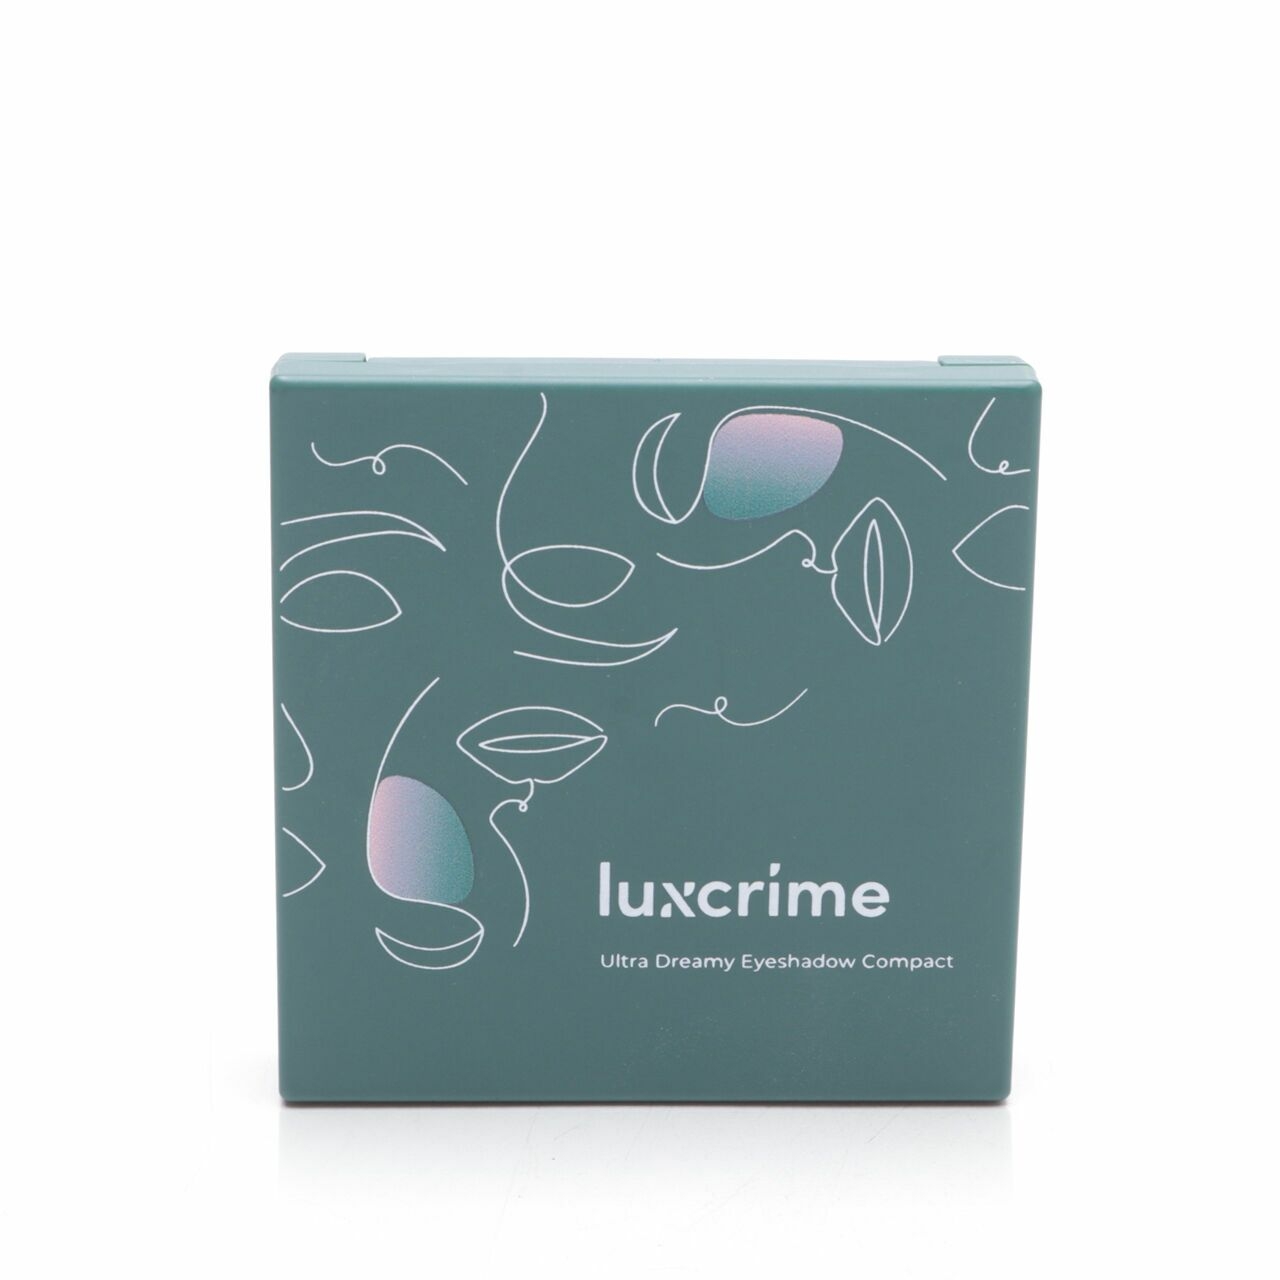 Luxcrime Ultra Dreamy Eyeshadow Compact - Black Forest Sets and Palette